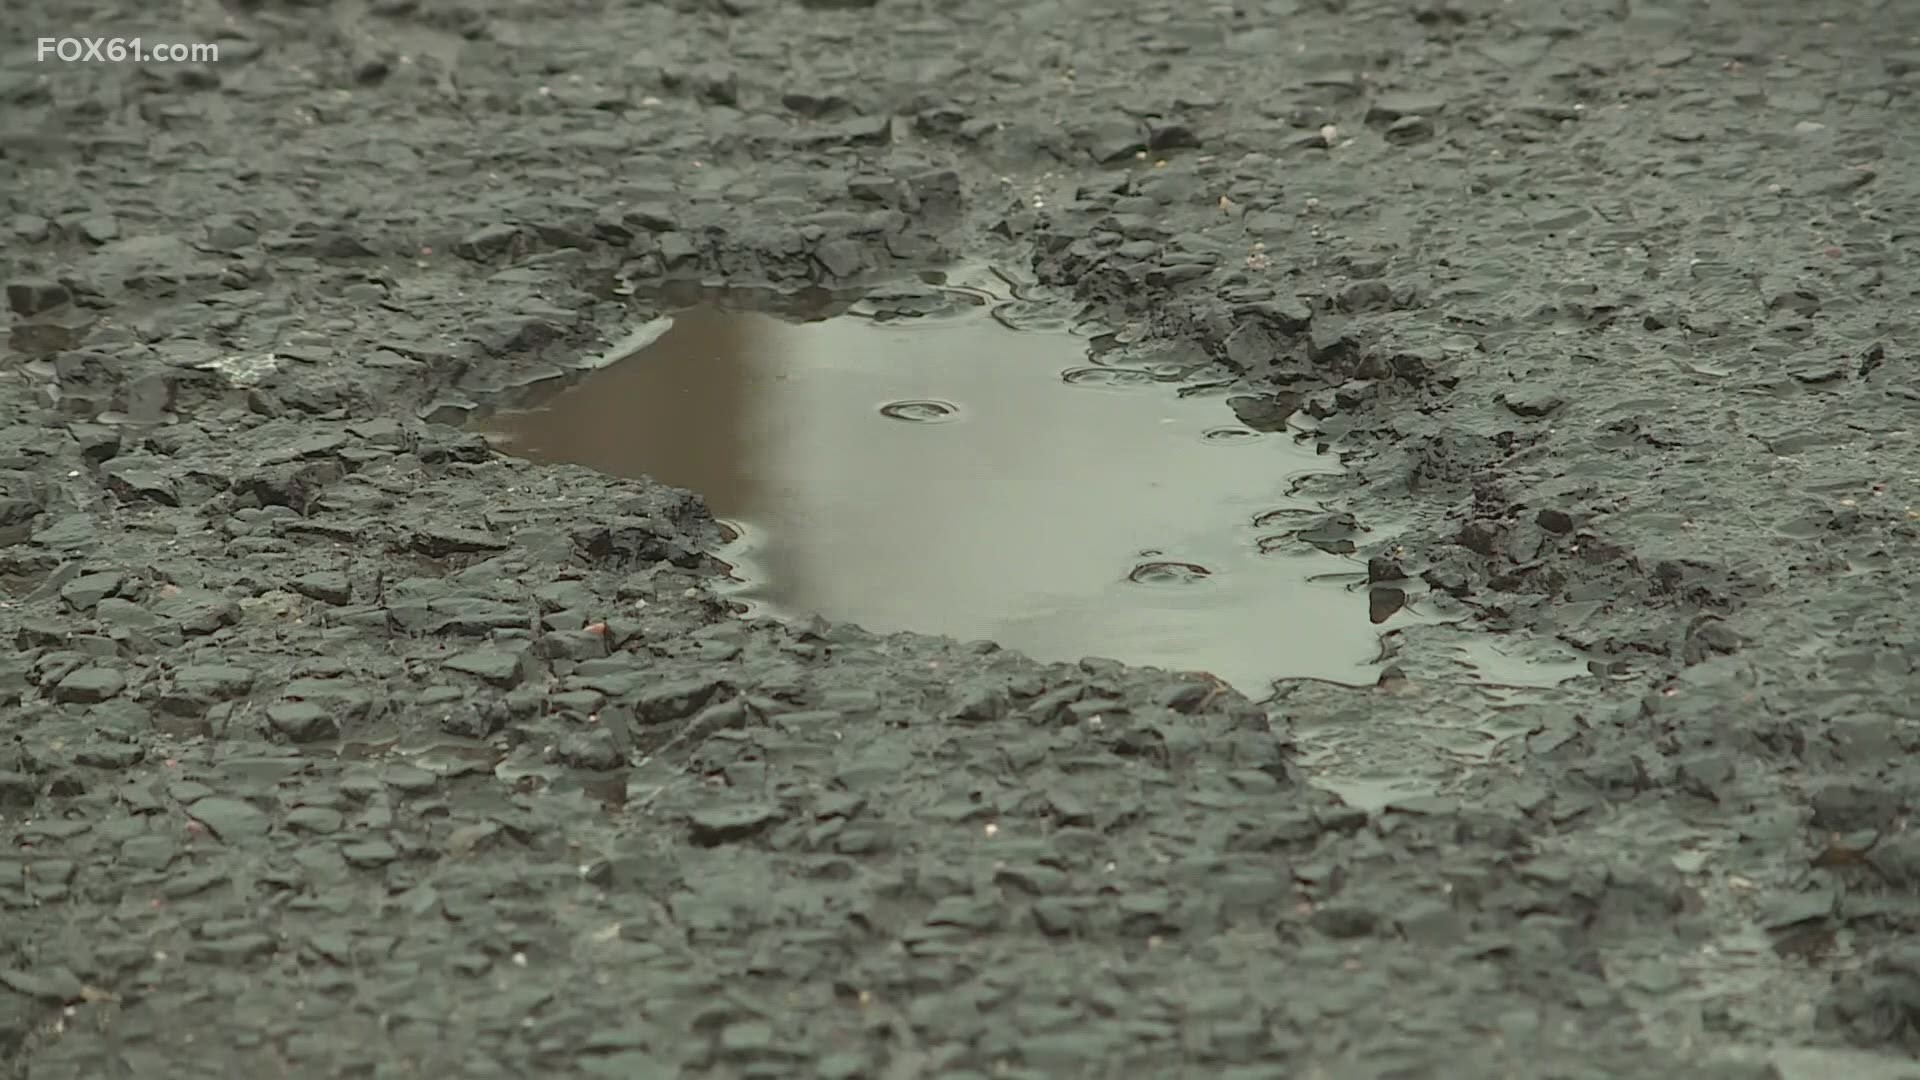 Nationwide drivers spend $3 billion dollars on pothole repairs on average per year, according to AAA.